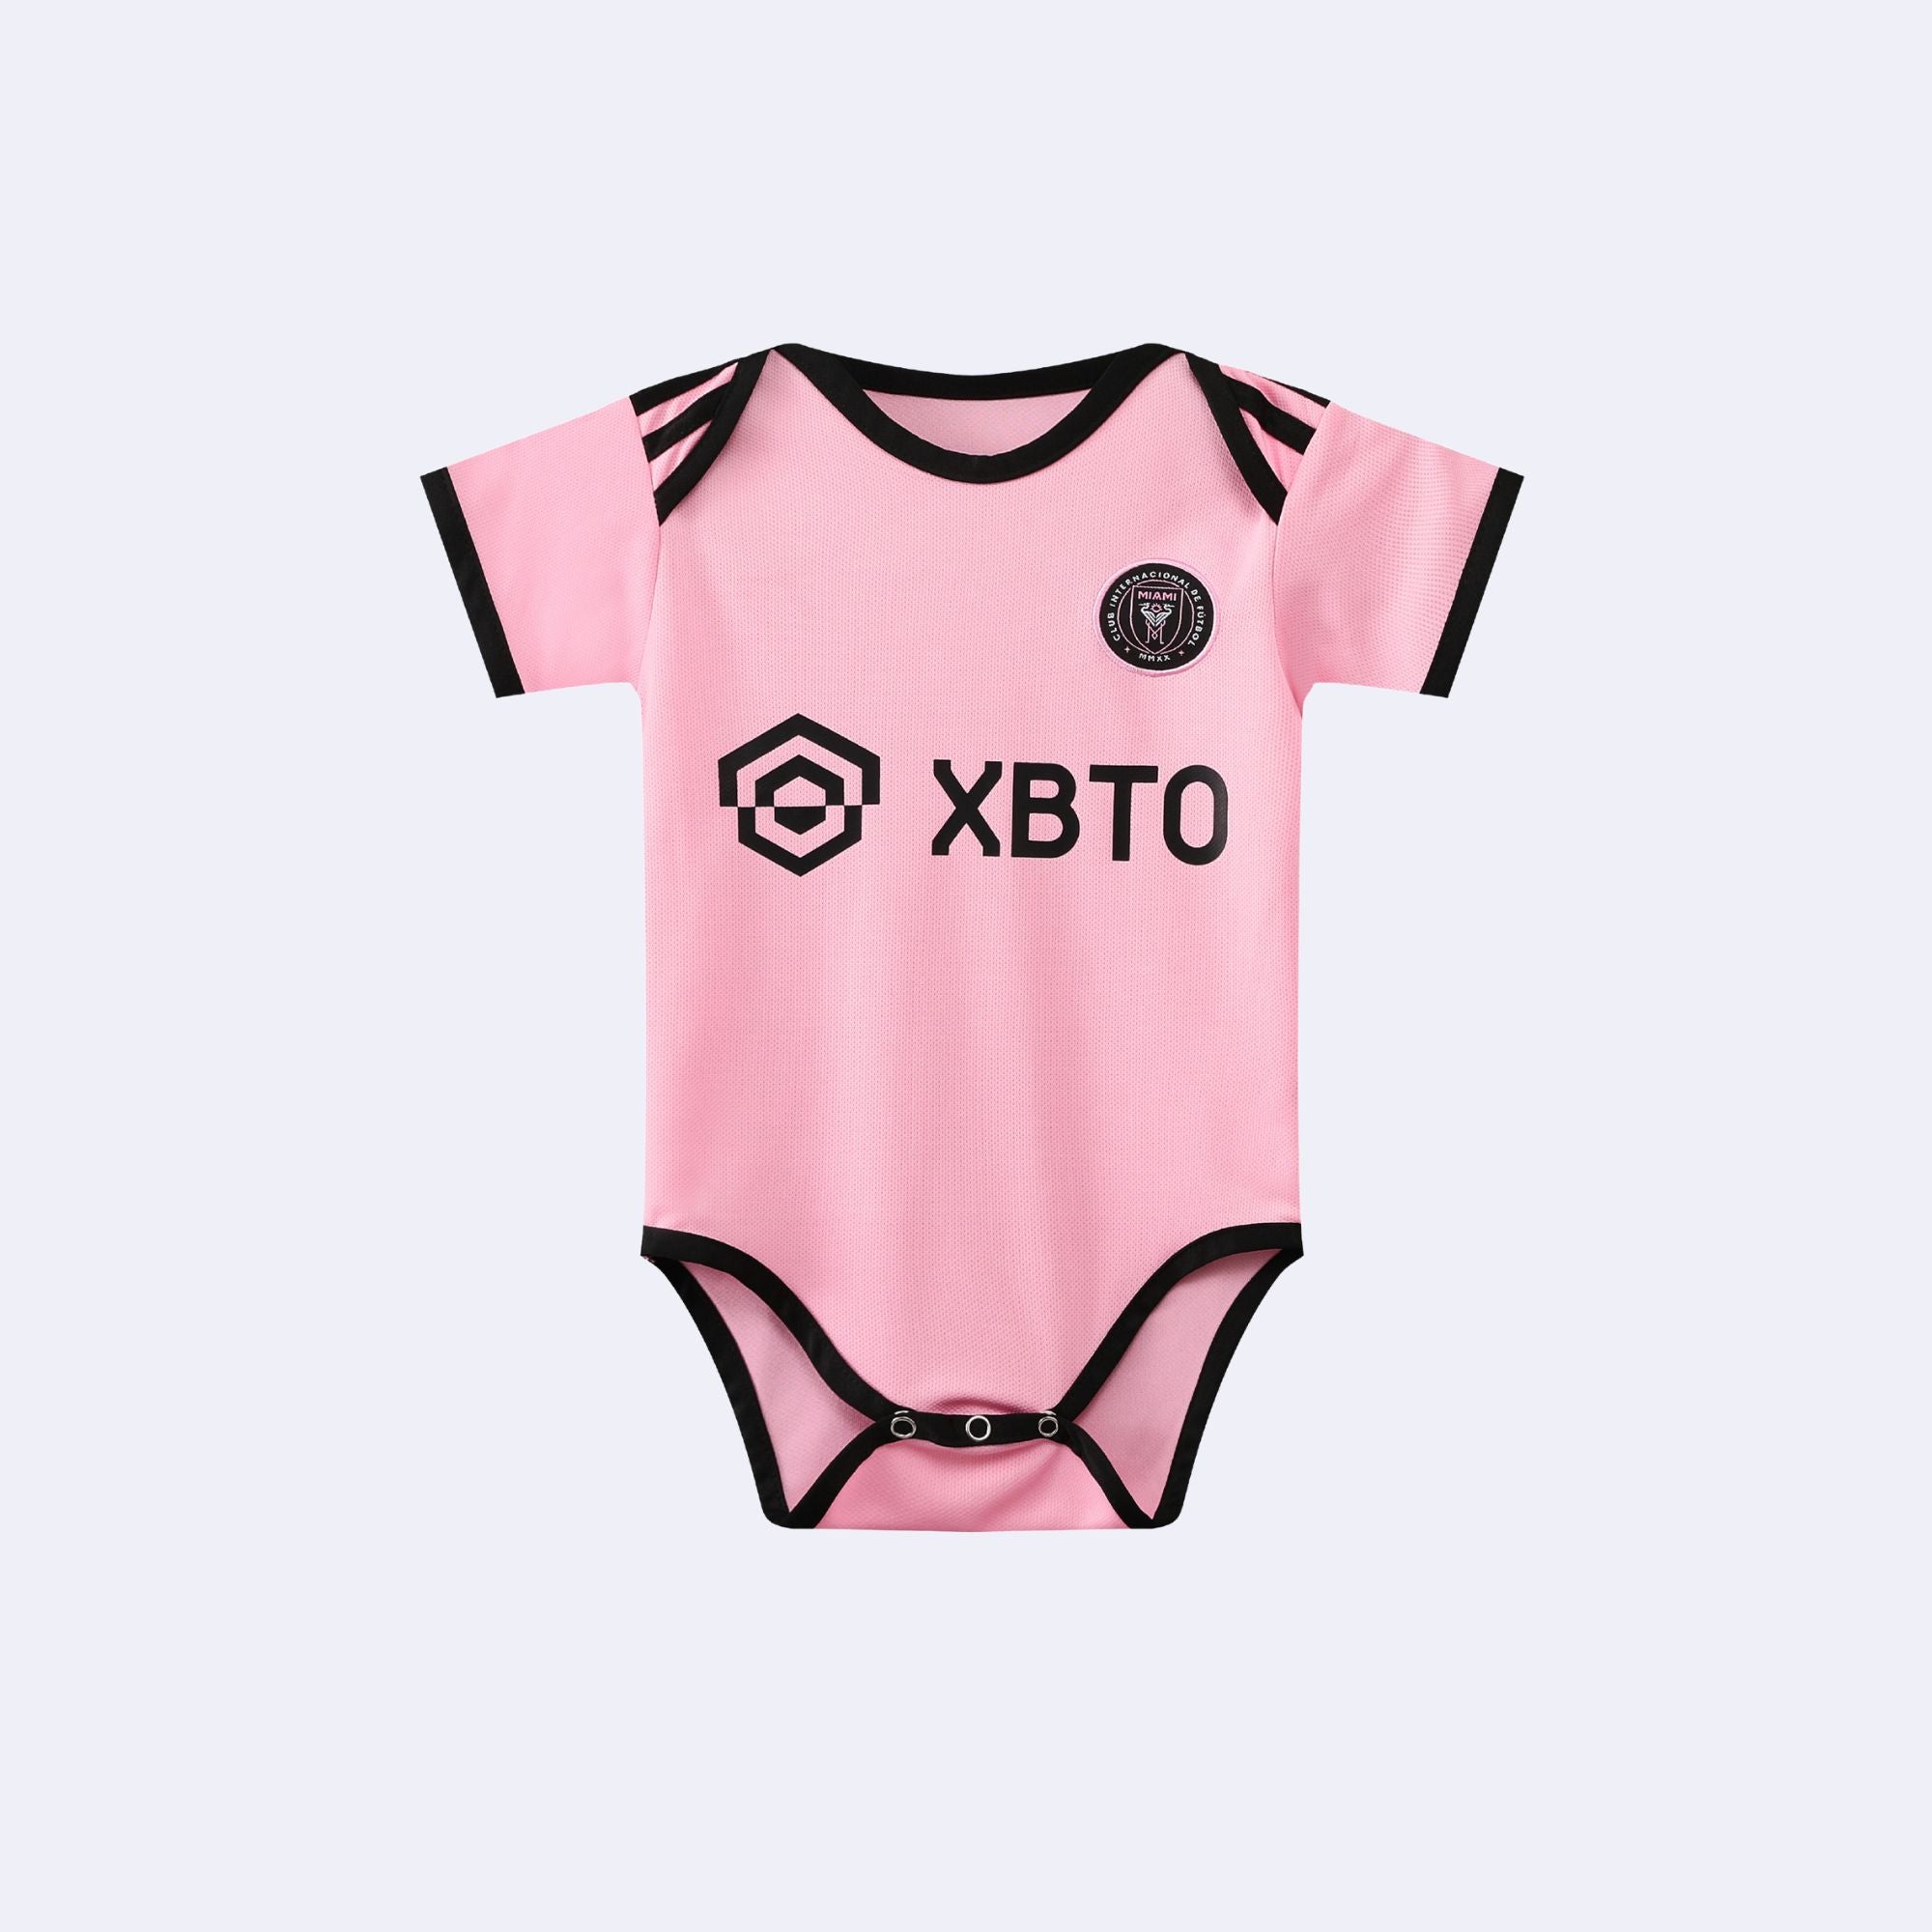 Inter Miami CF Home Baby Jersey MESSI 10